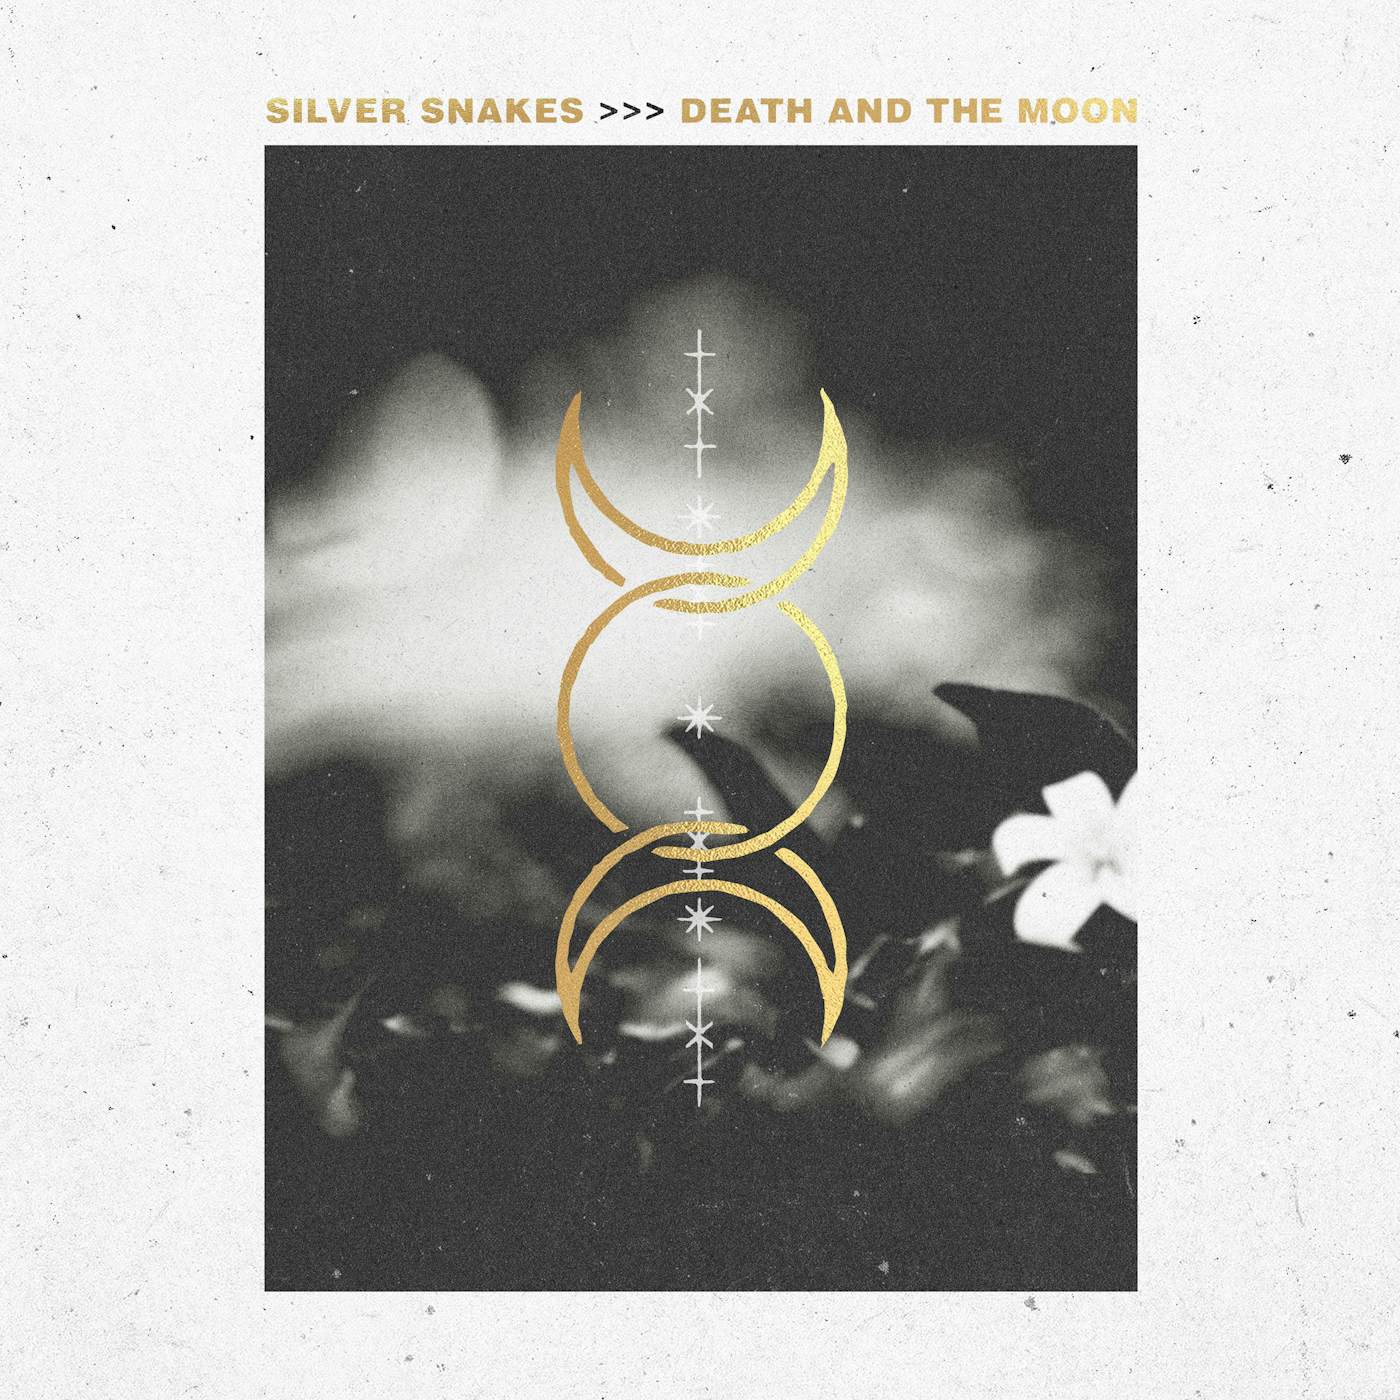 Silver Snakes Death and the Moon Vinyl Record